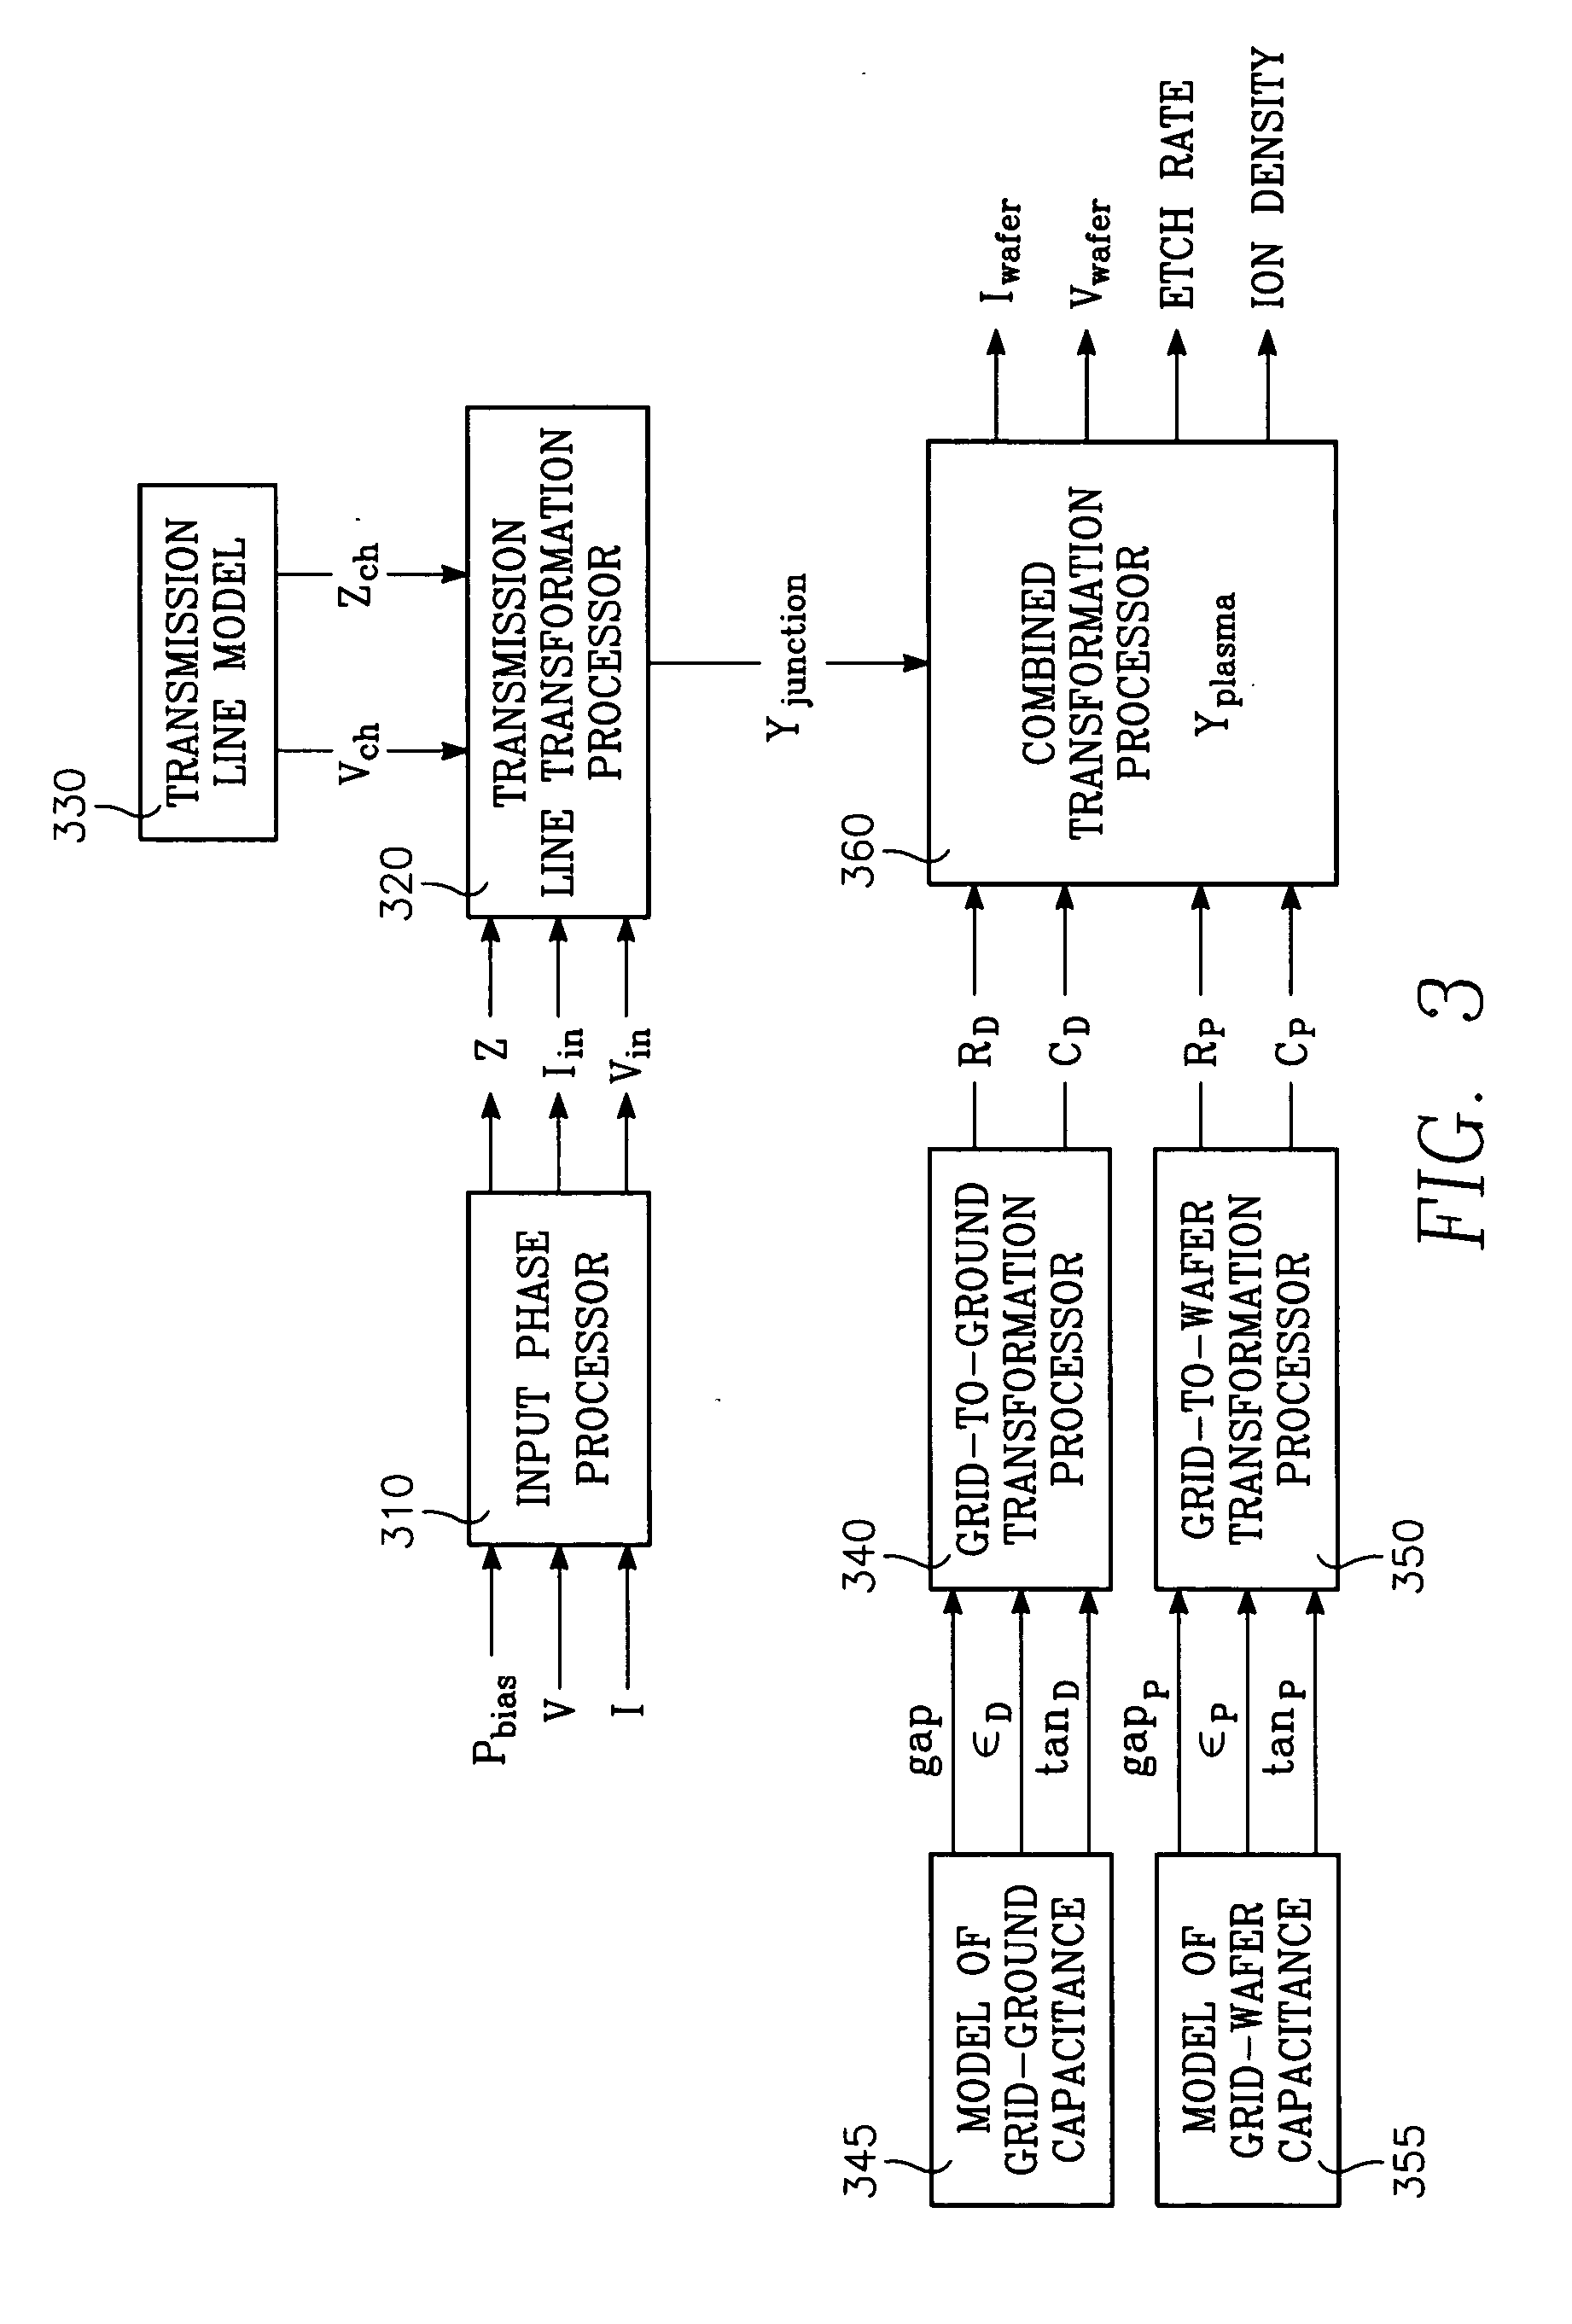 Method of controlling chamber parameters of a plasma reactor in accordance with desired values of plural plasma parameters, by translating desired values for the plural plasma parameters to control values for each of the chamber parameters